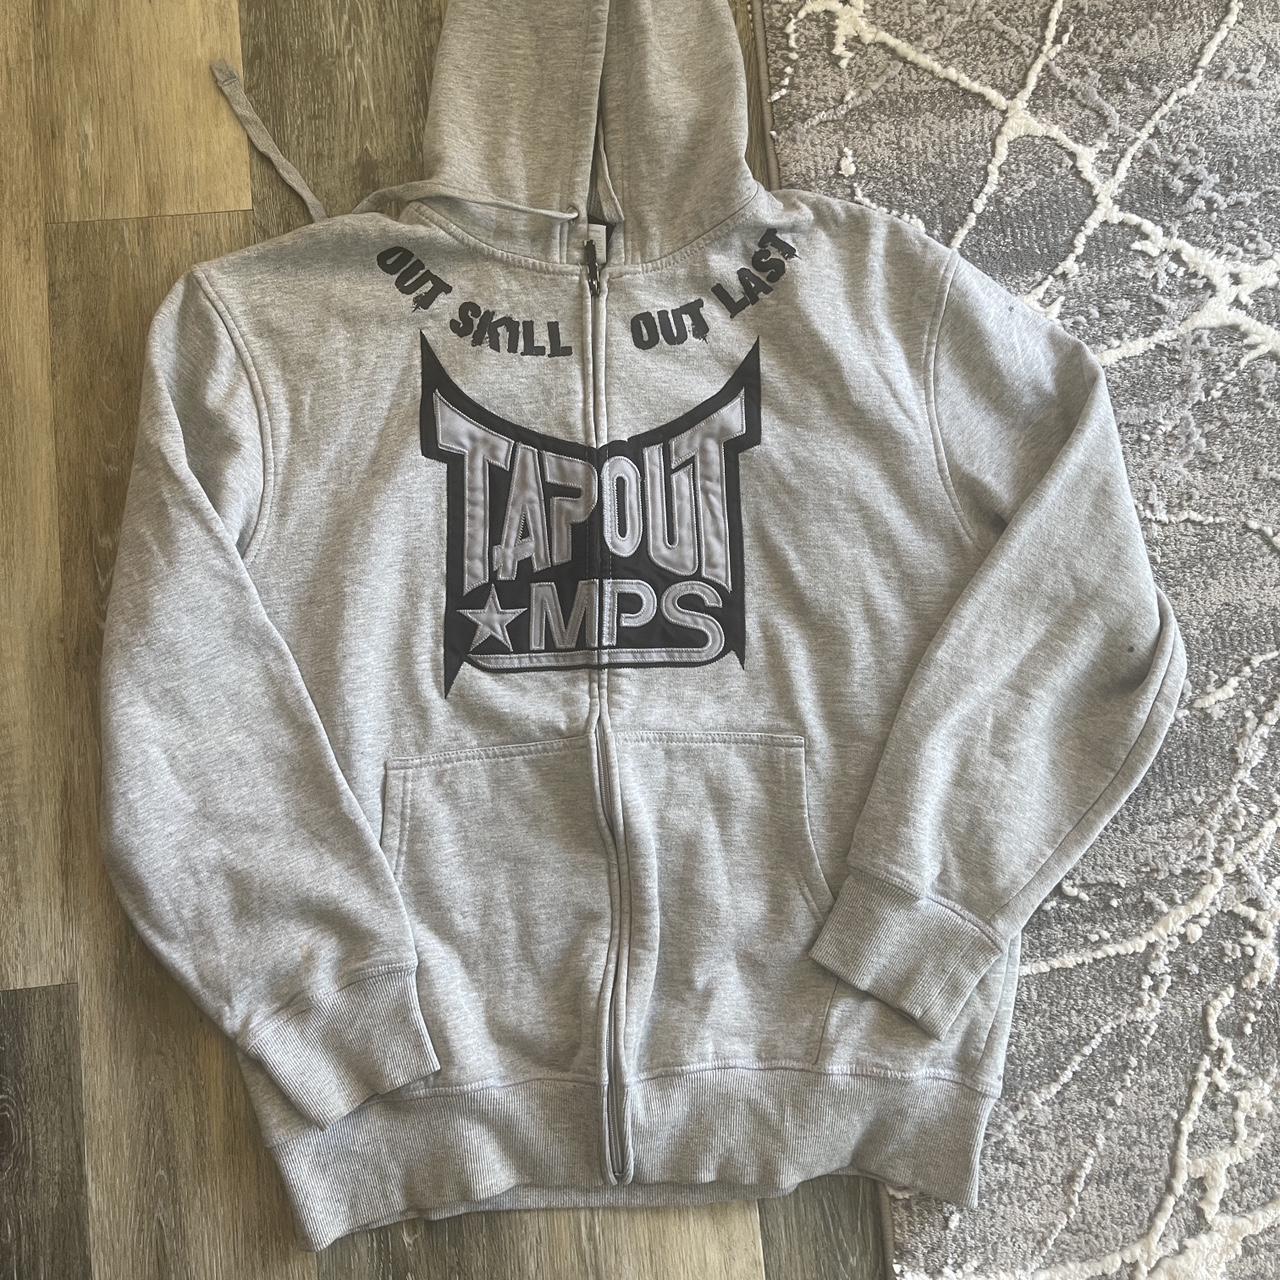 Vintage tapout zip up hoodie in great condition no... - Depop